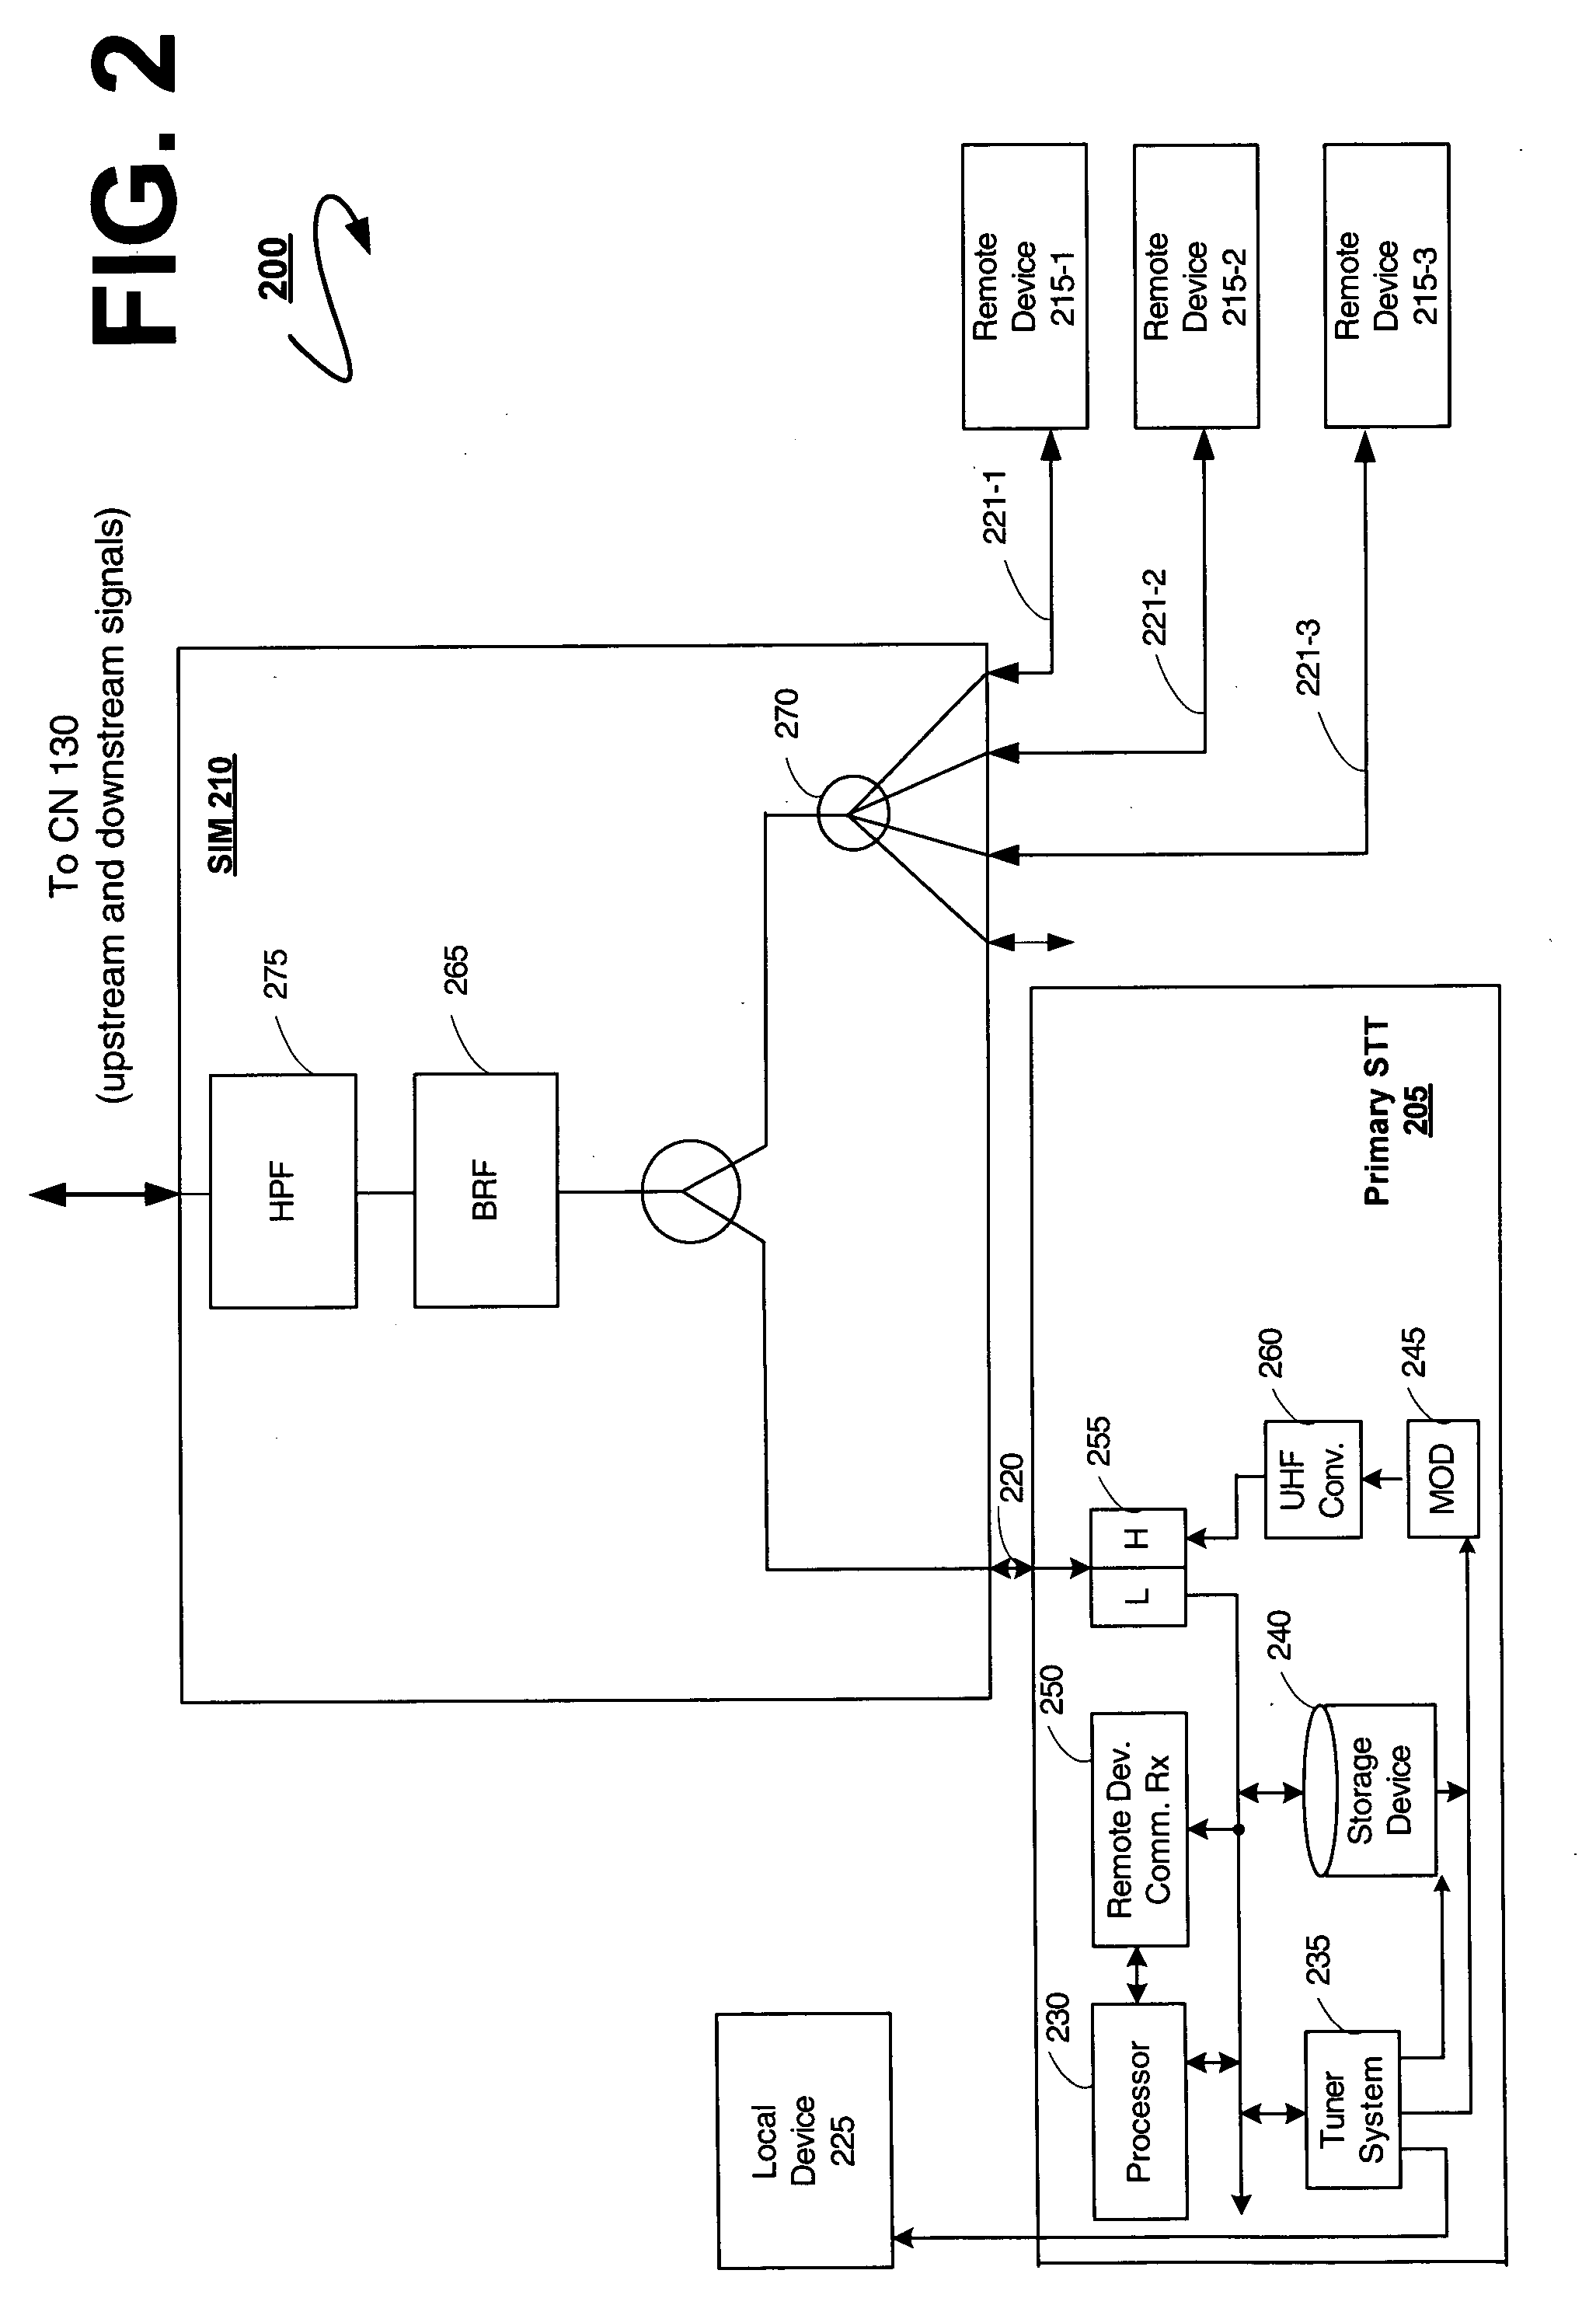 Networked multimedia system having a multi-room interactive network guide